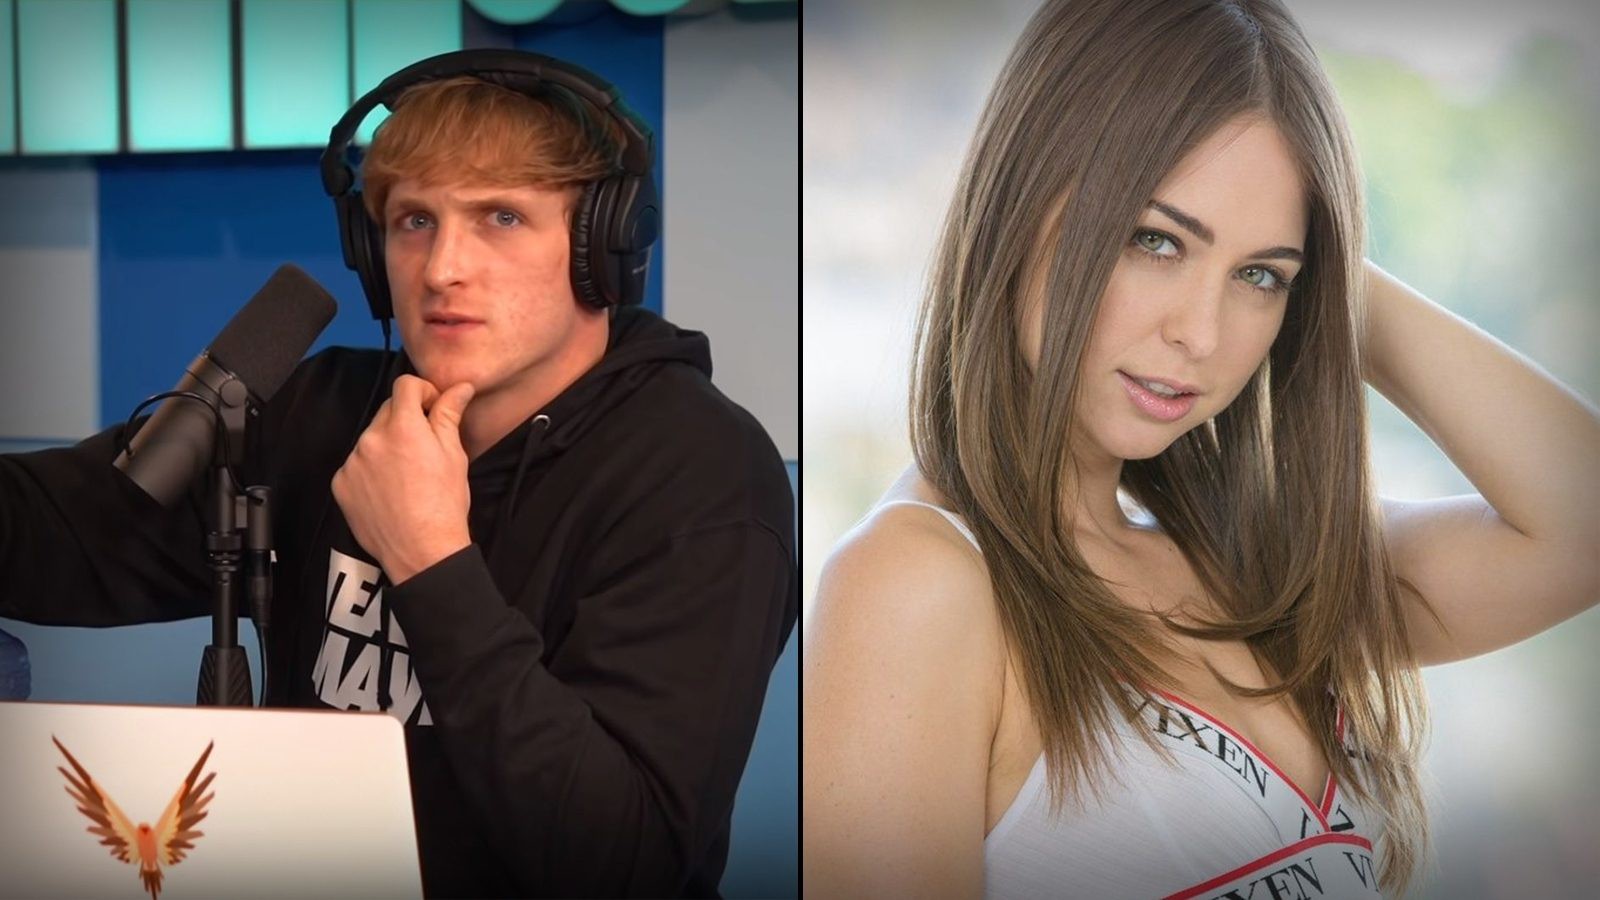 ashleigh mcquarters recommends riley reid and logan paul pic